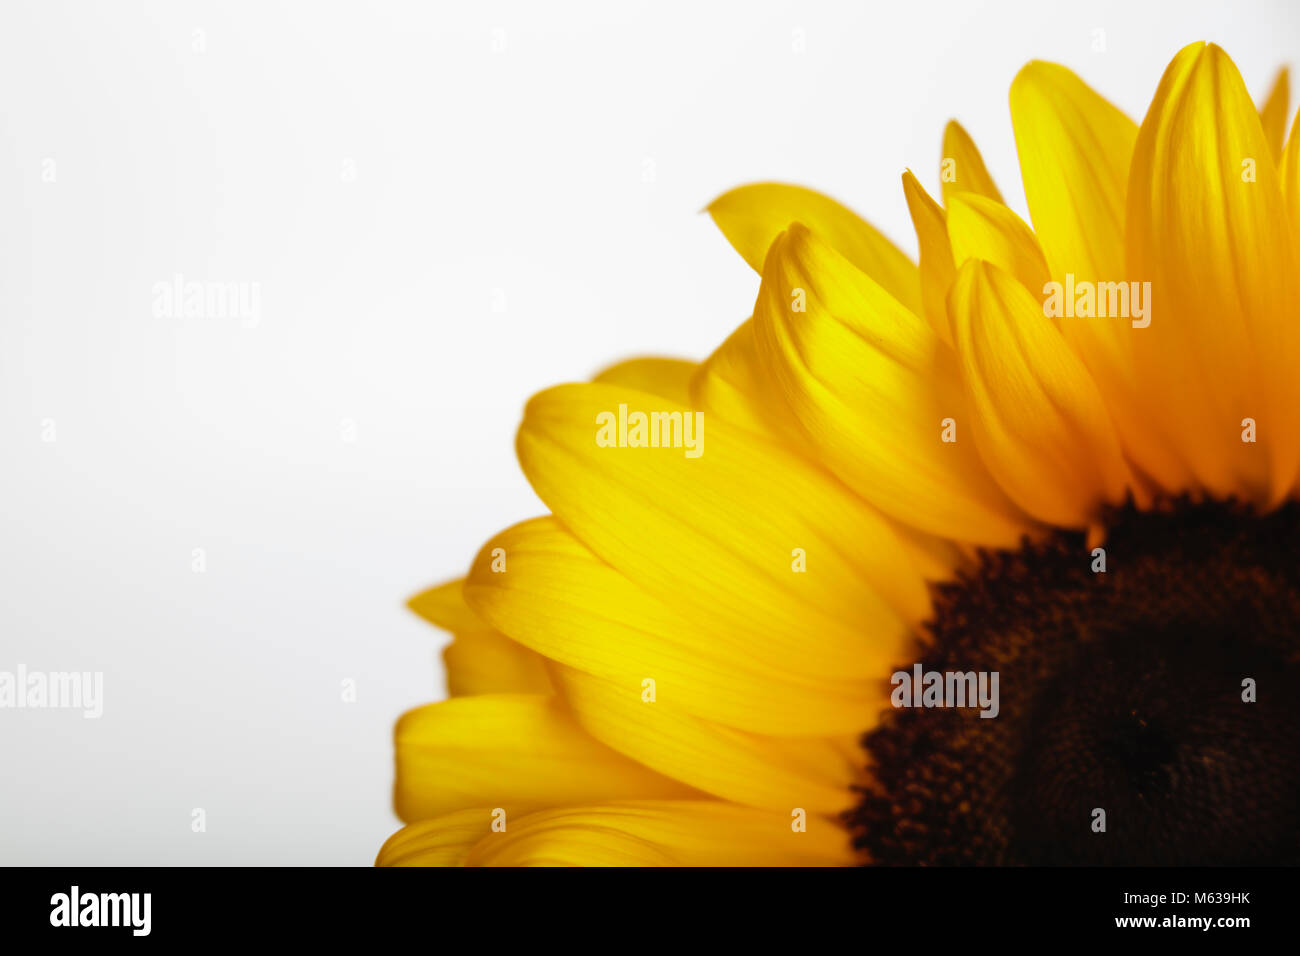 Close up of part of a sunflower against a white background showing the contrast between the soft yellow petals and the harder florets in the middle. Stock Photo